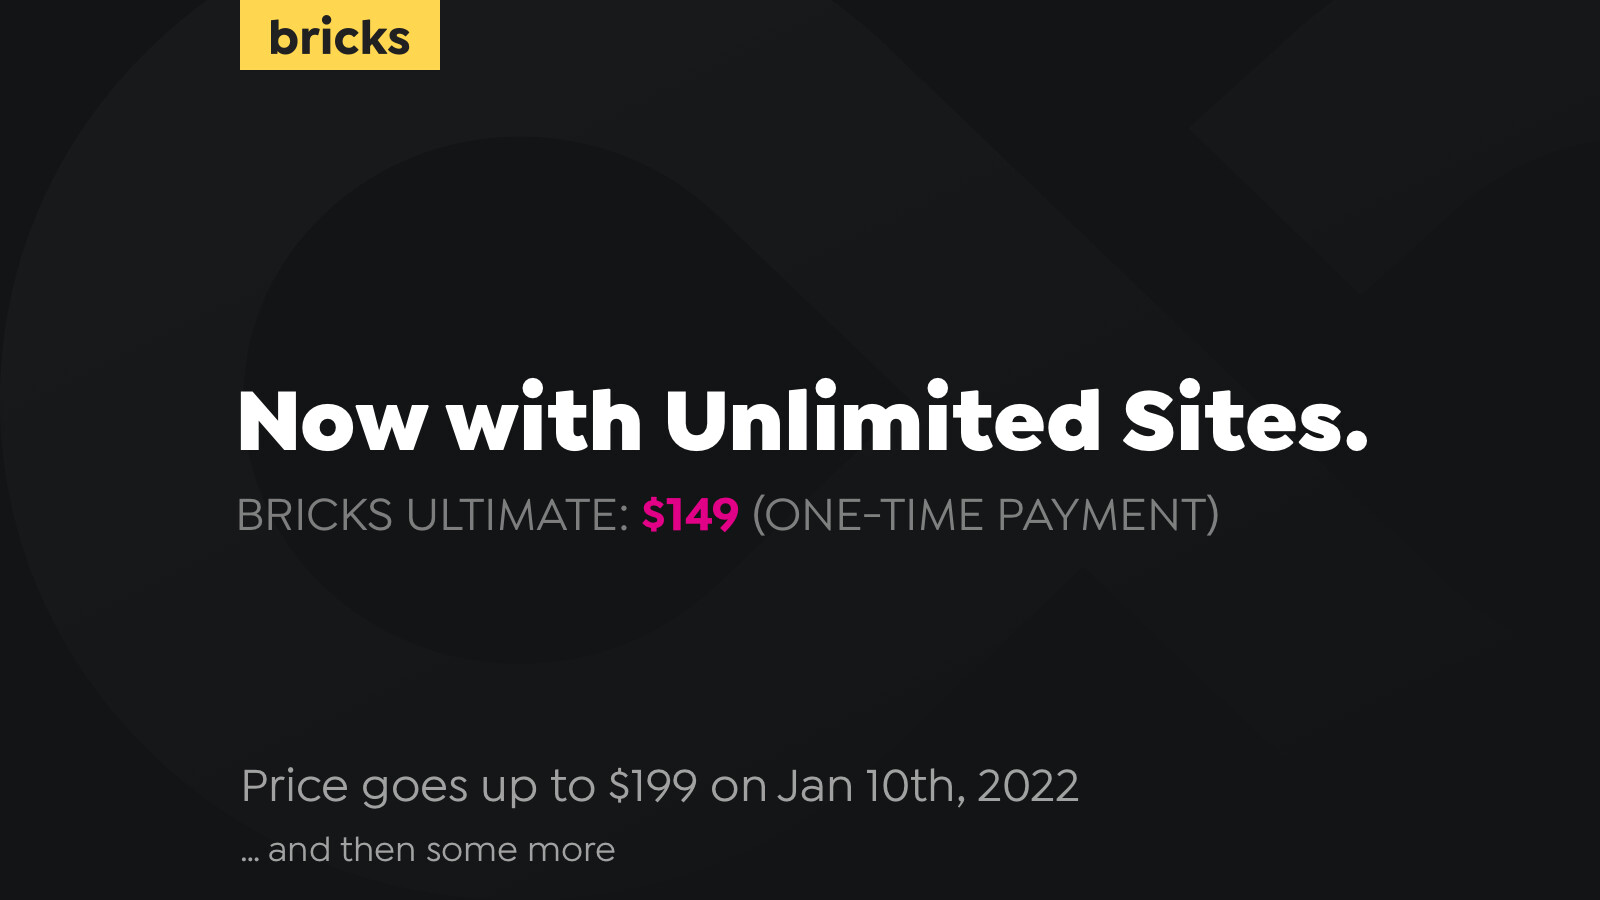 Bricks Ultimate - Unlimited Sites for $149